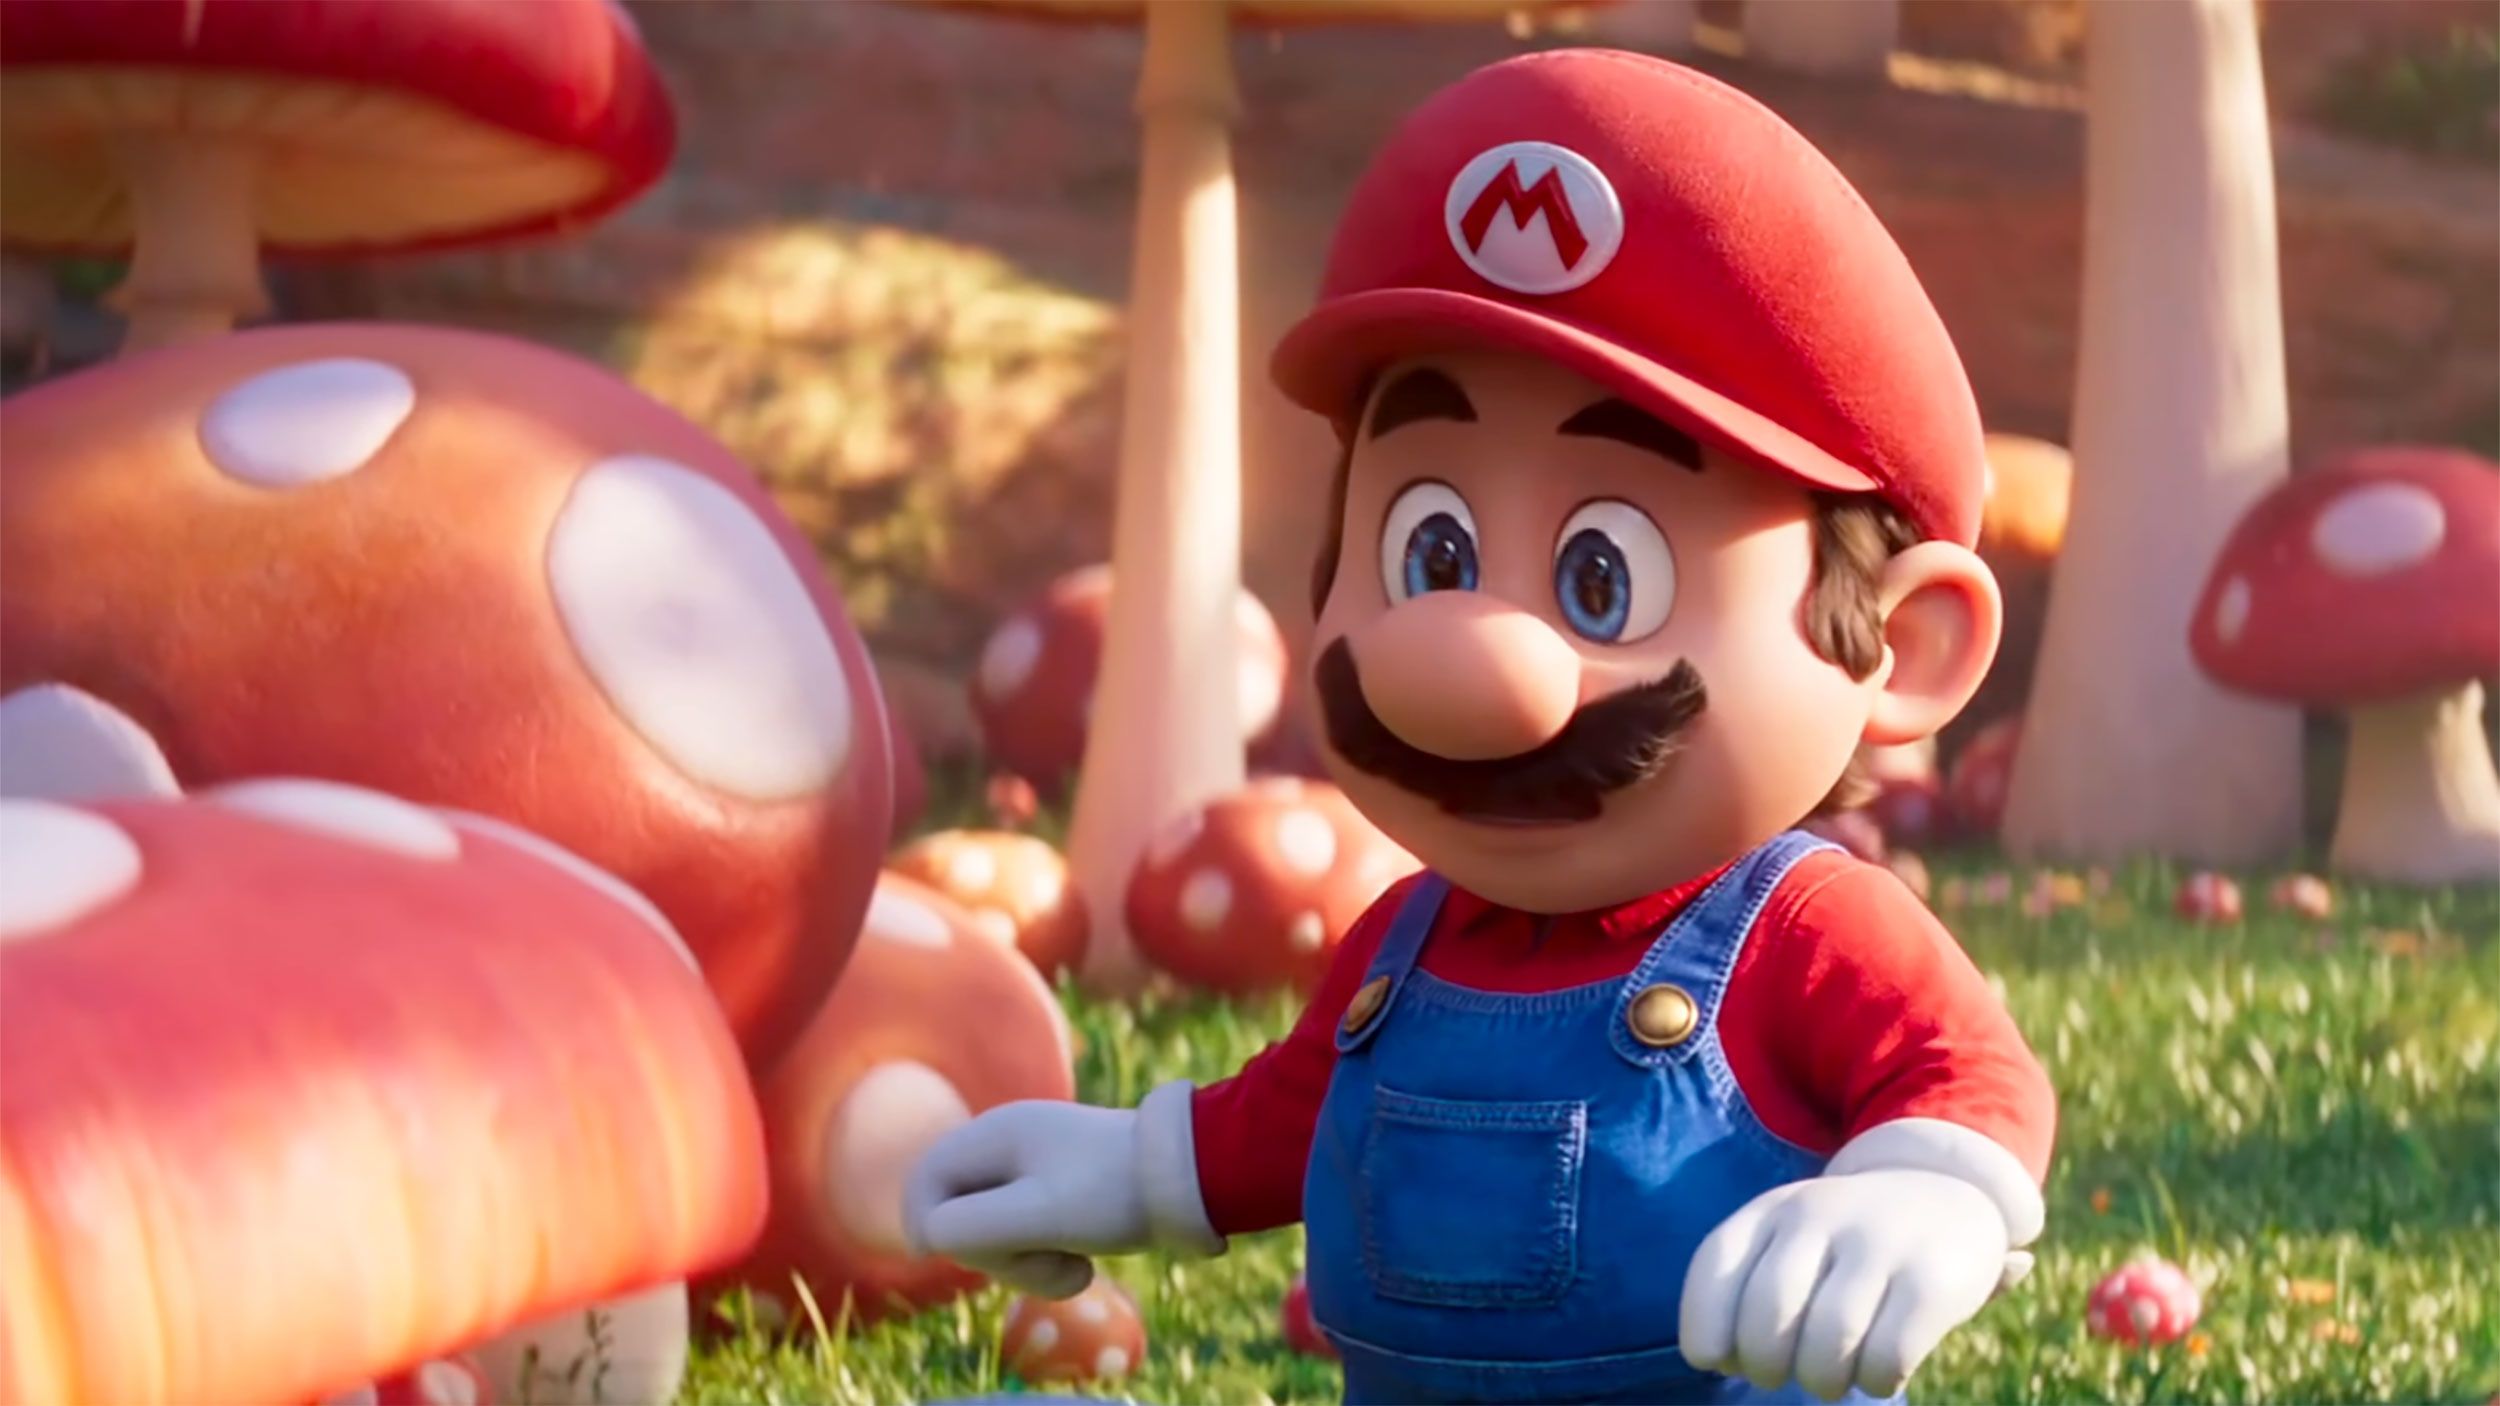 The Super Mario Bros. Movie' wins big at the box office with record opening